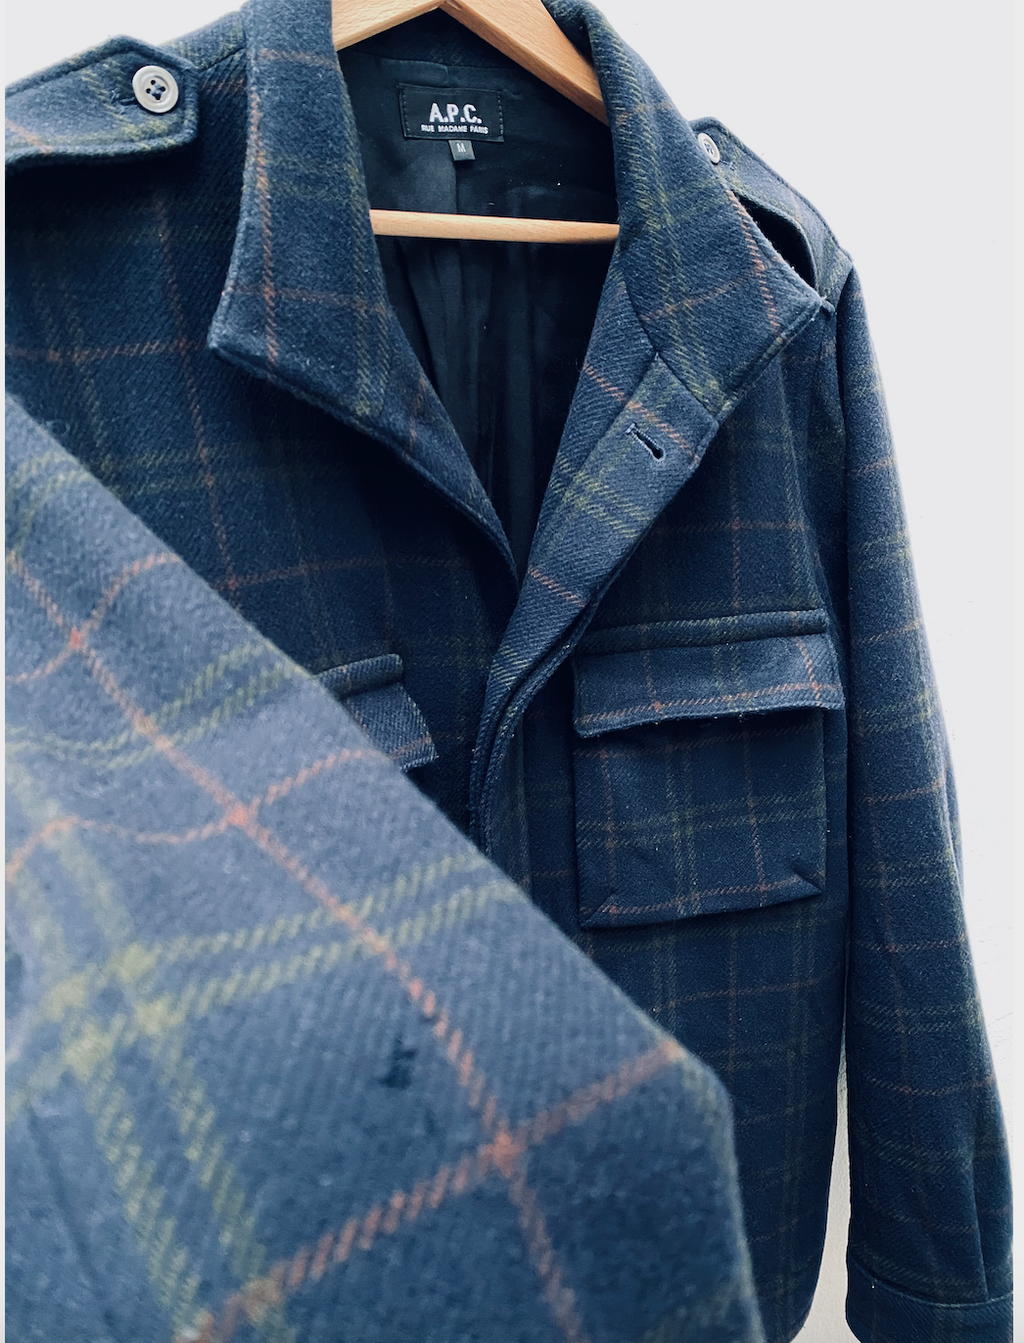 A.P.C. Navy Checkered Jacket / Thick Overshirt Size M